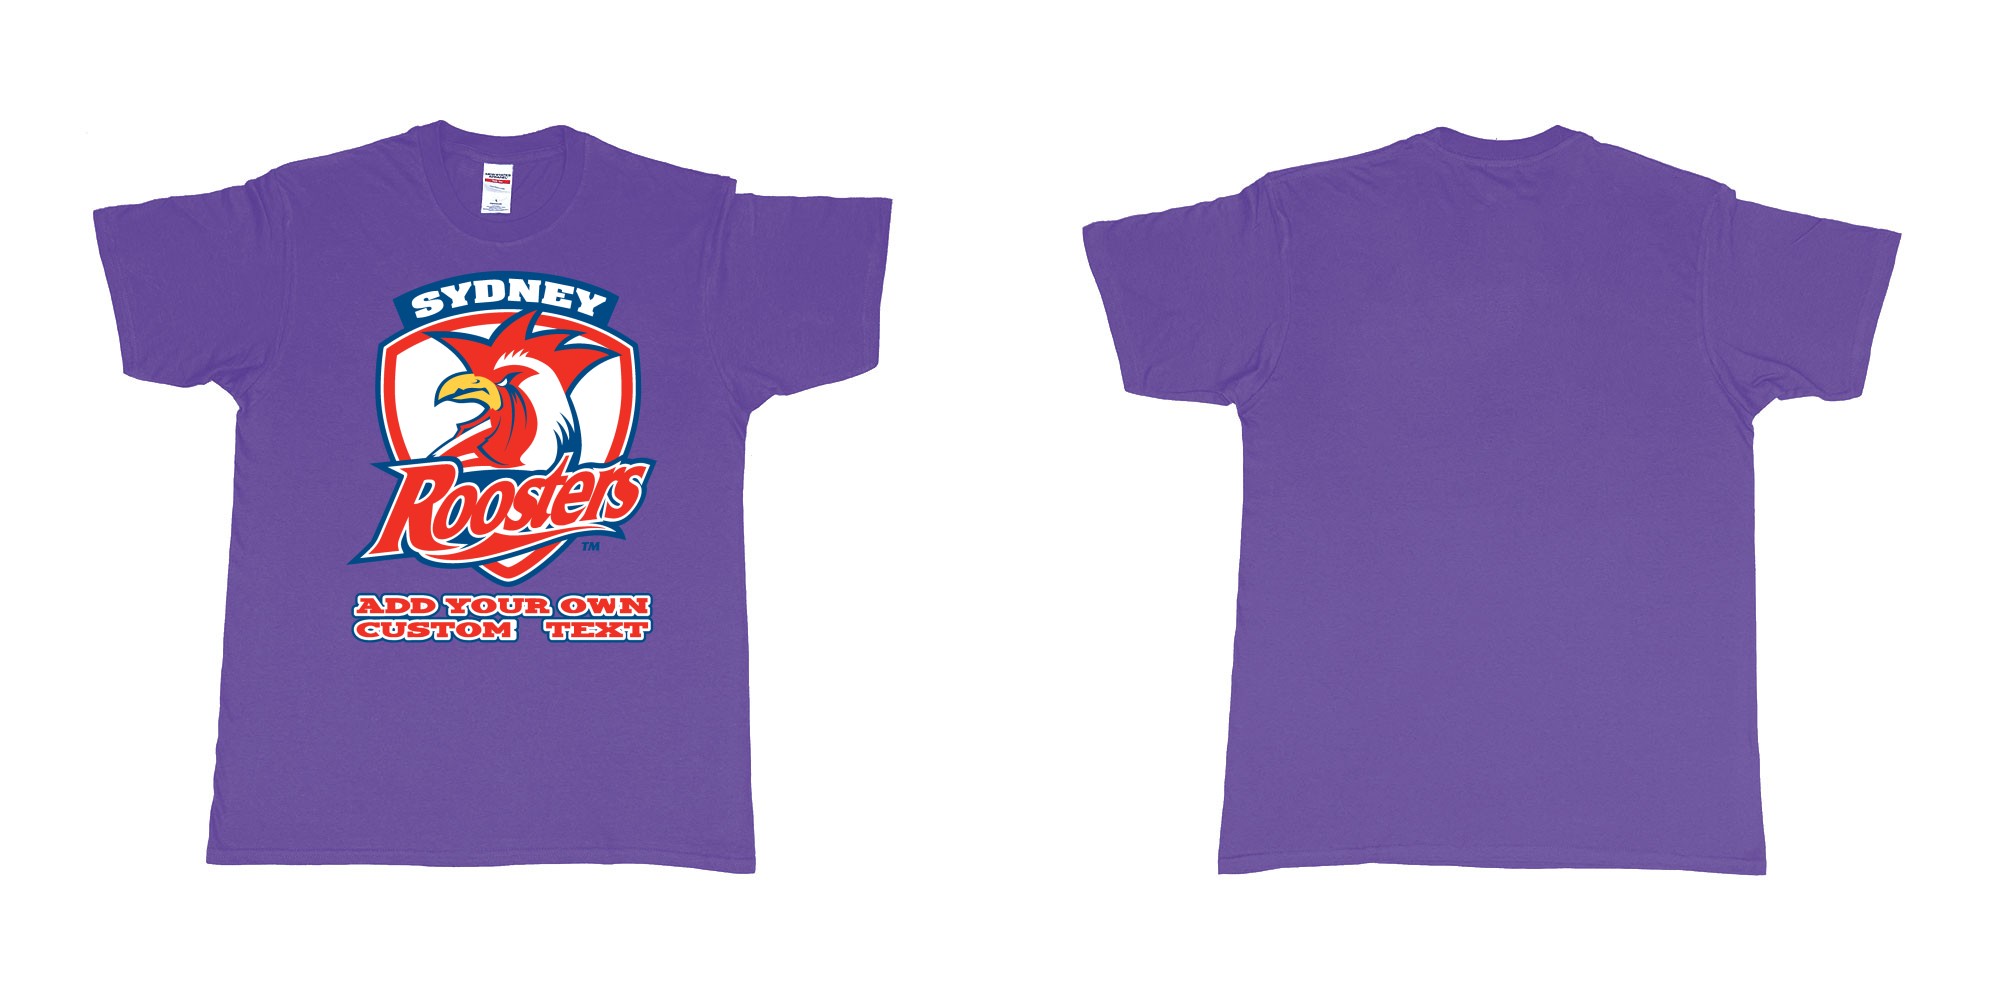 Custom tshirt design sydney roosters custom NRL design in fabric color purple choice your own text made in Bali by The Pirate Way